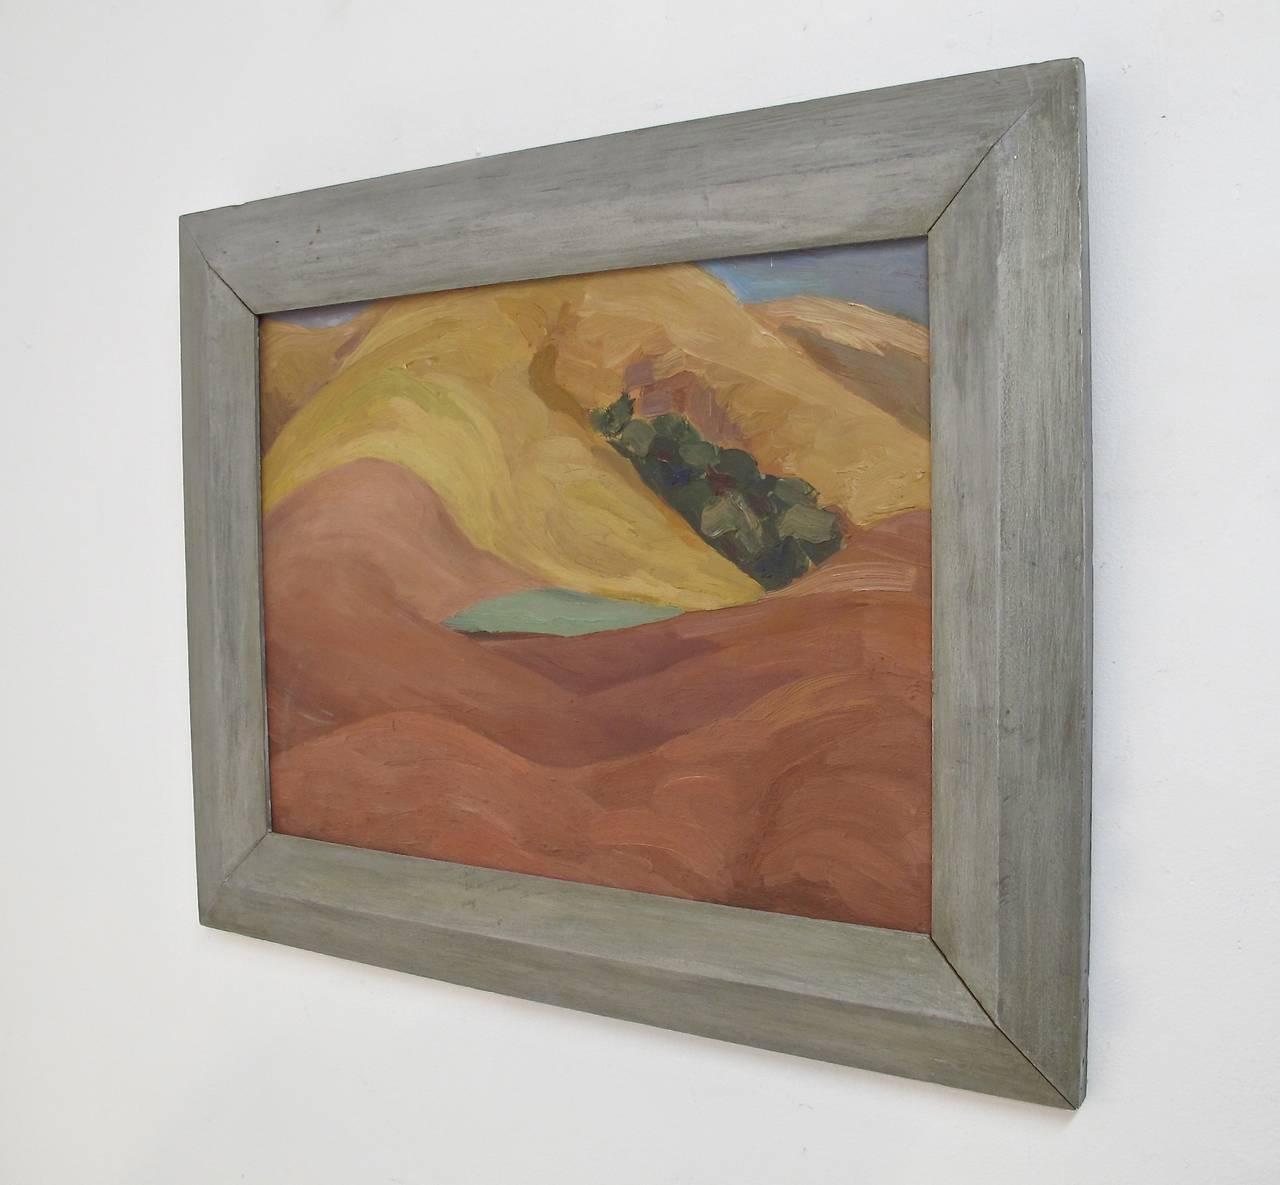 Small abstract framed landscape painting, oil on board in painted wood frame. Painted by Ruth Armer b.1896-d.1977.

A painter, educator and lithographer, Ruth Armer was born in San Francisco and spent her career in that city. She attended the